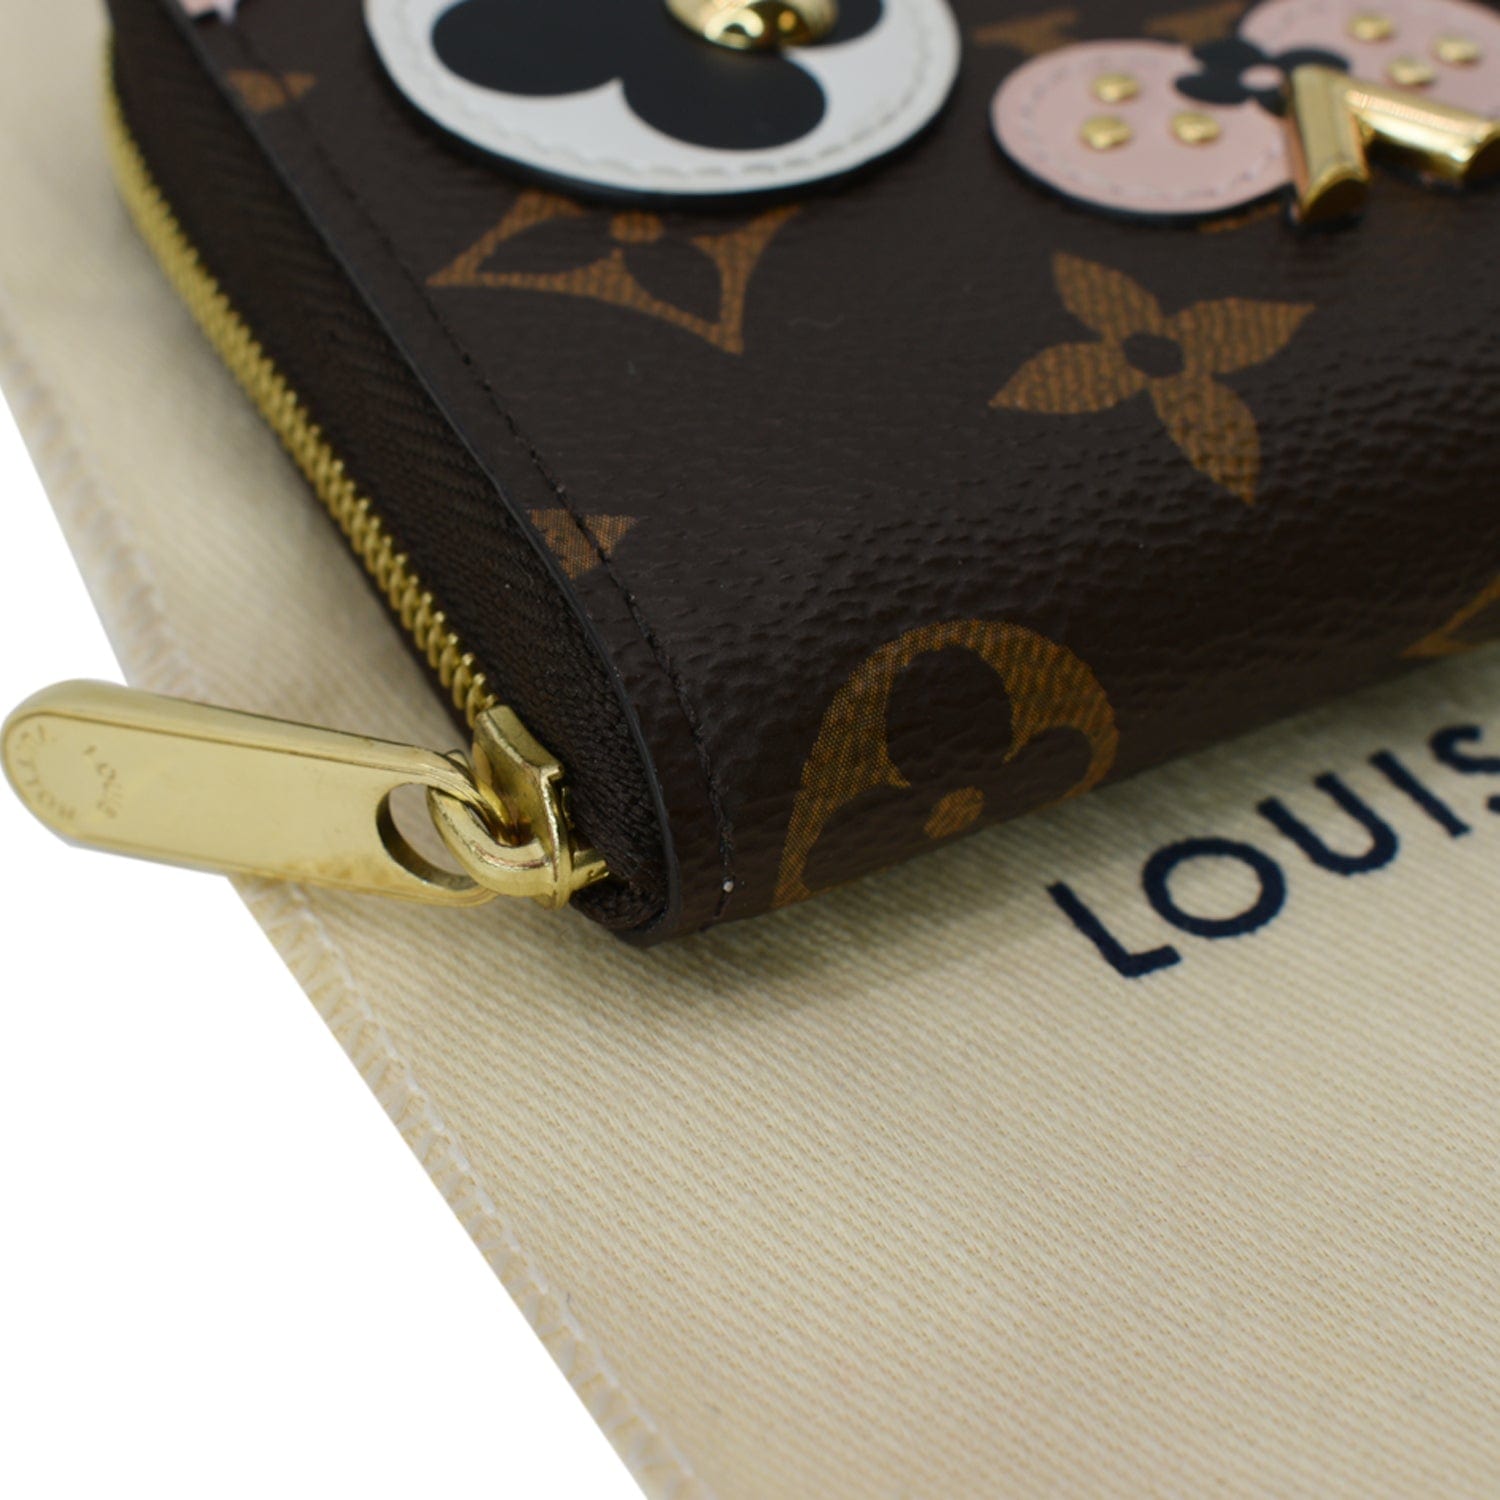 Louis Vuitton Heart Coin Purse Monogram Brown in Canvas with Gold-tone - US